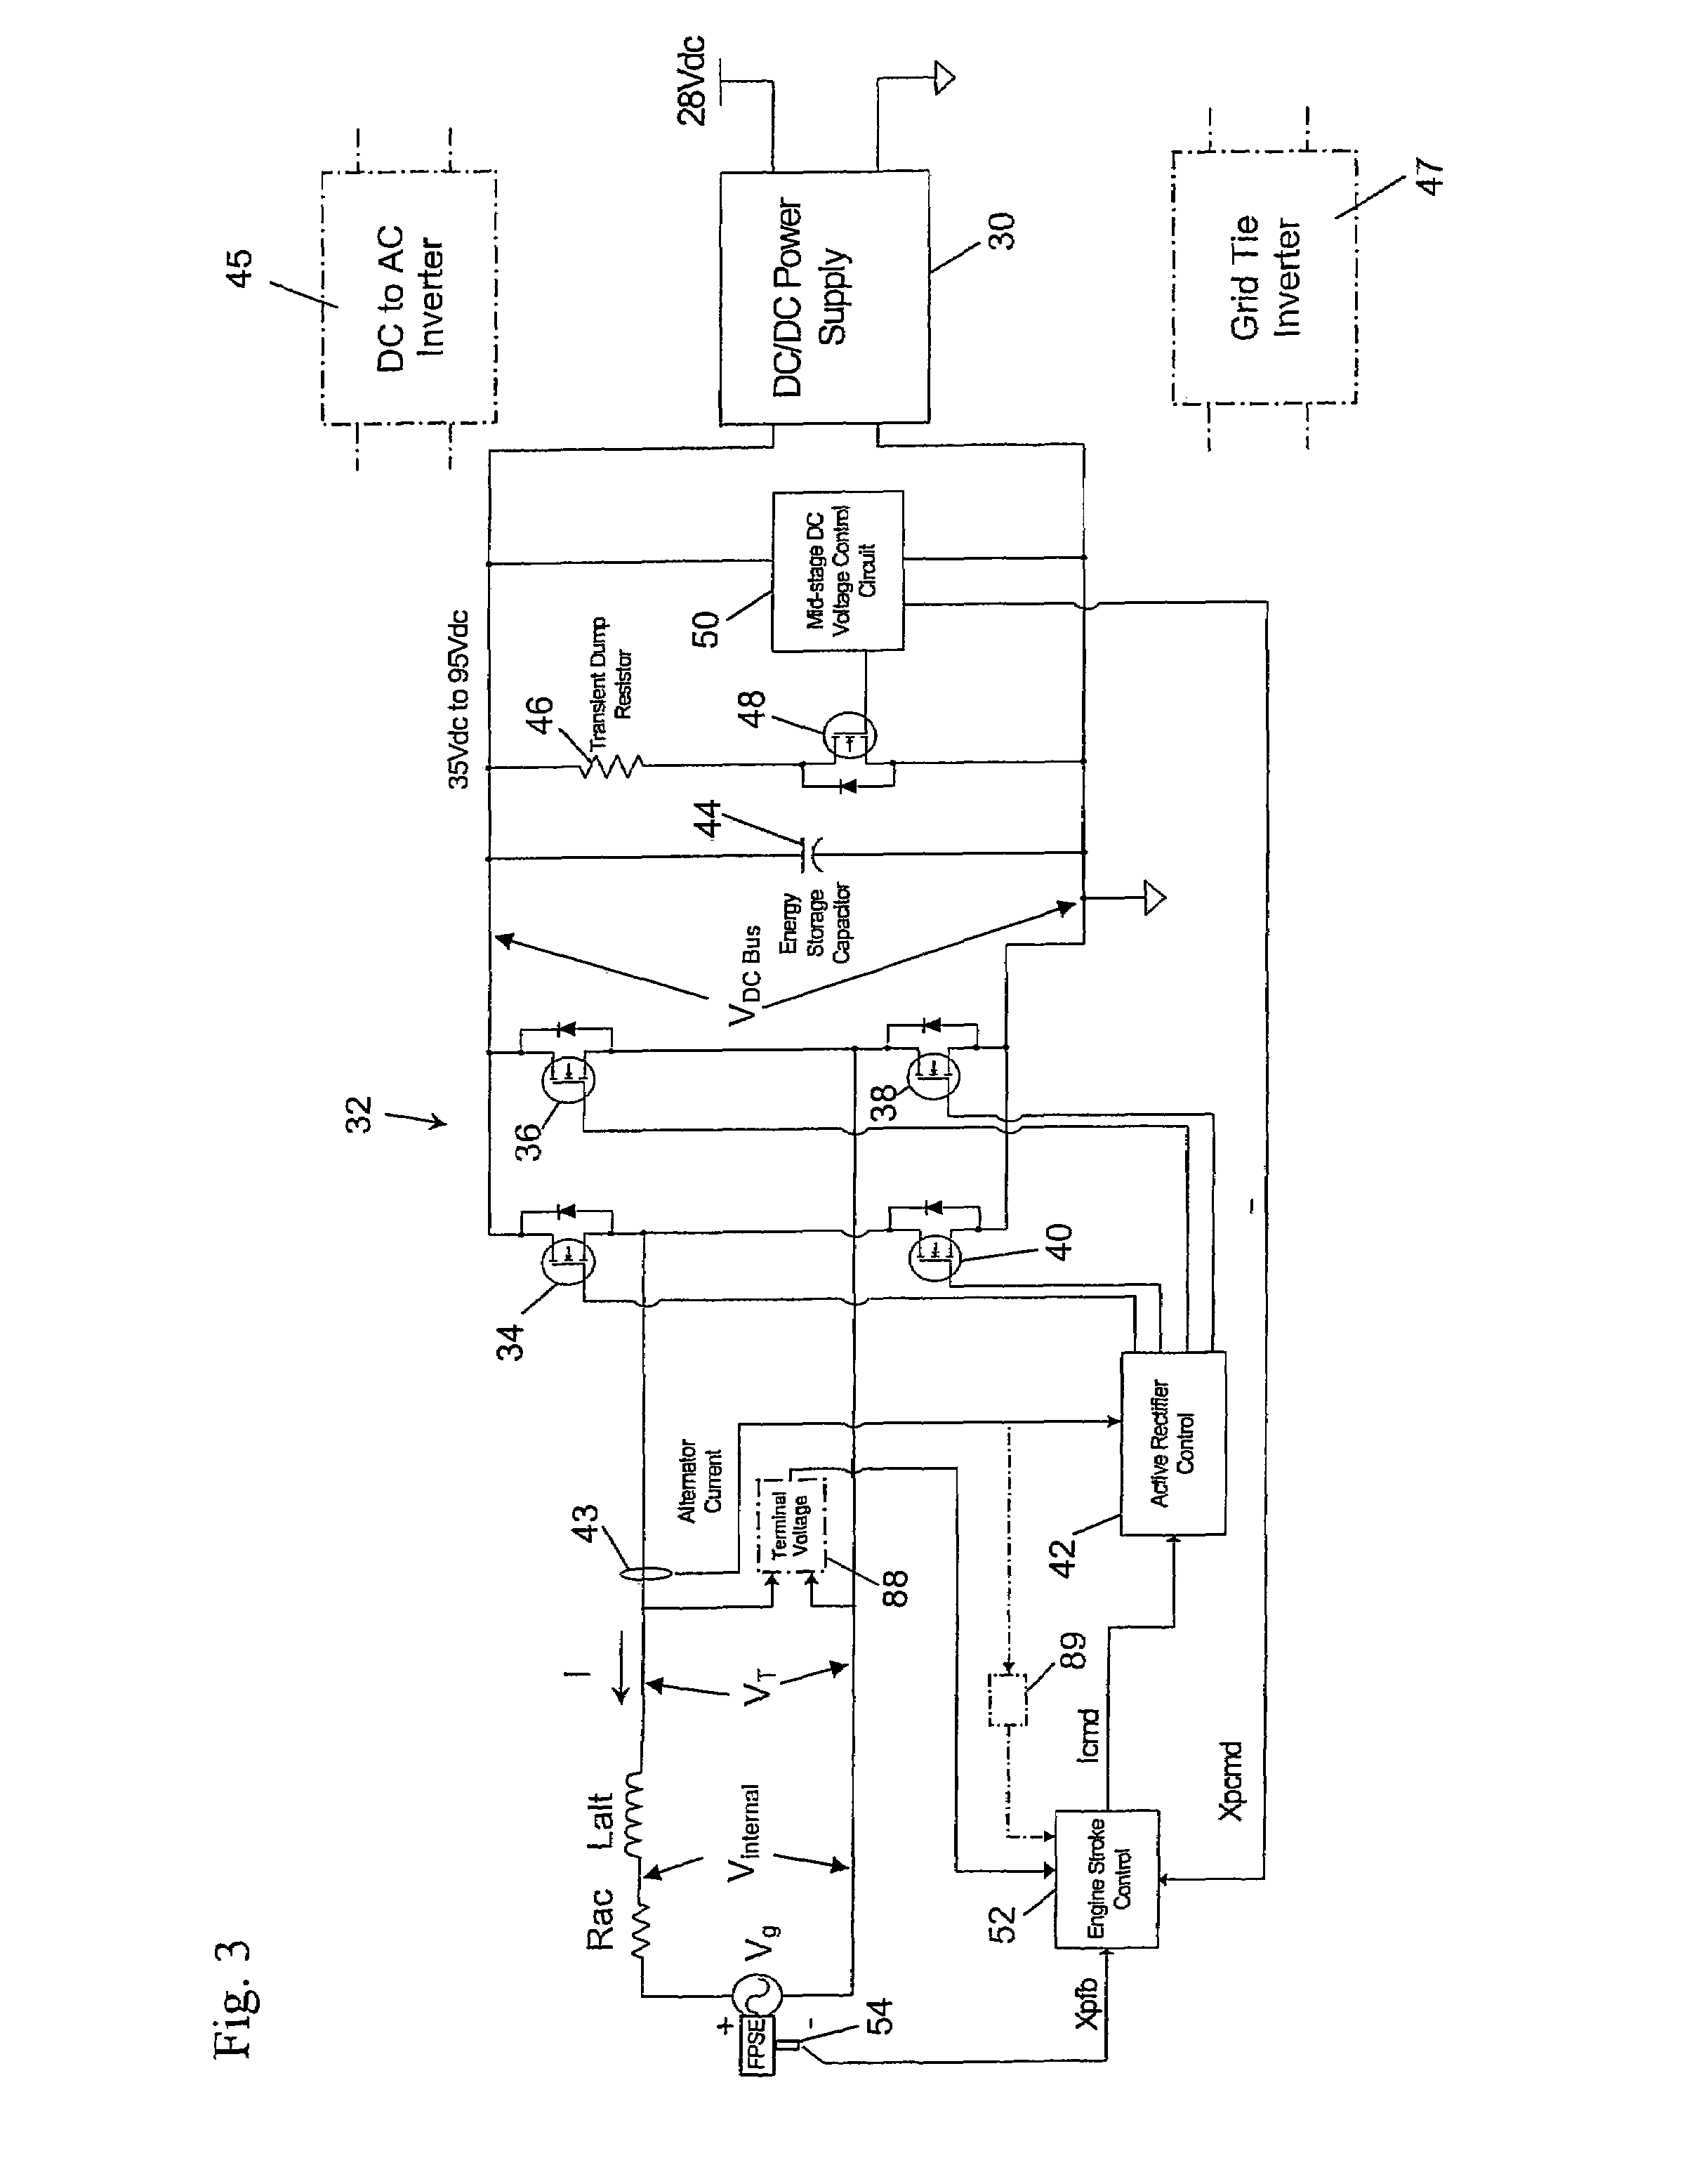 Electronic controller matching engine power to alternator power and maintaining engine frequency for a free-piston stirling engine driving a linear alternator